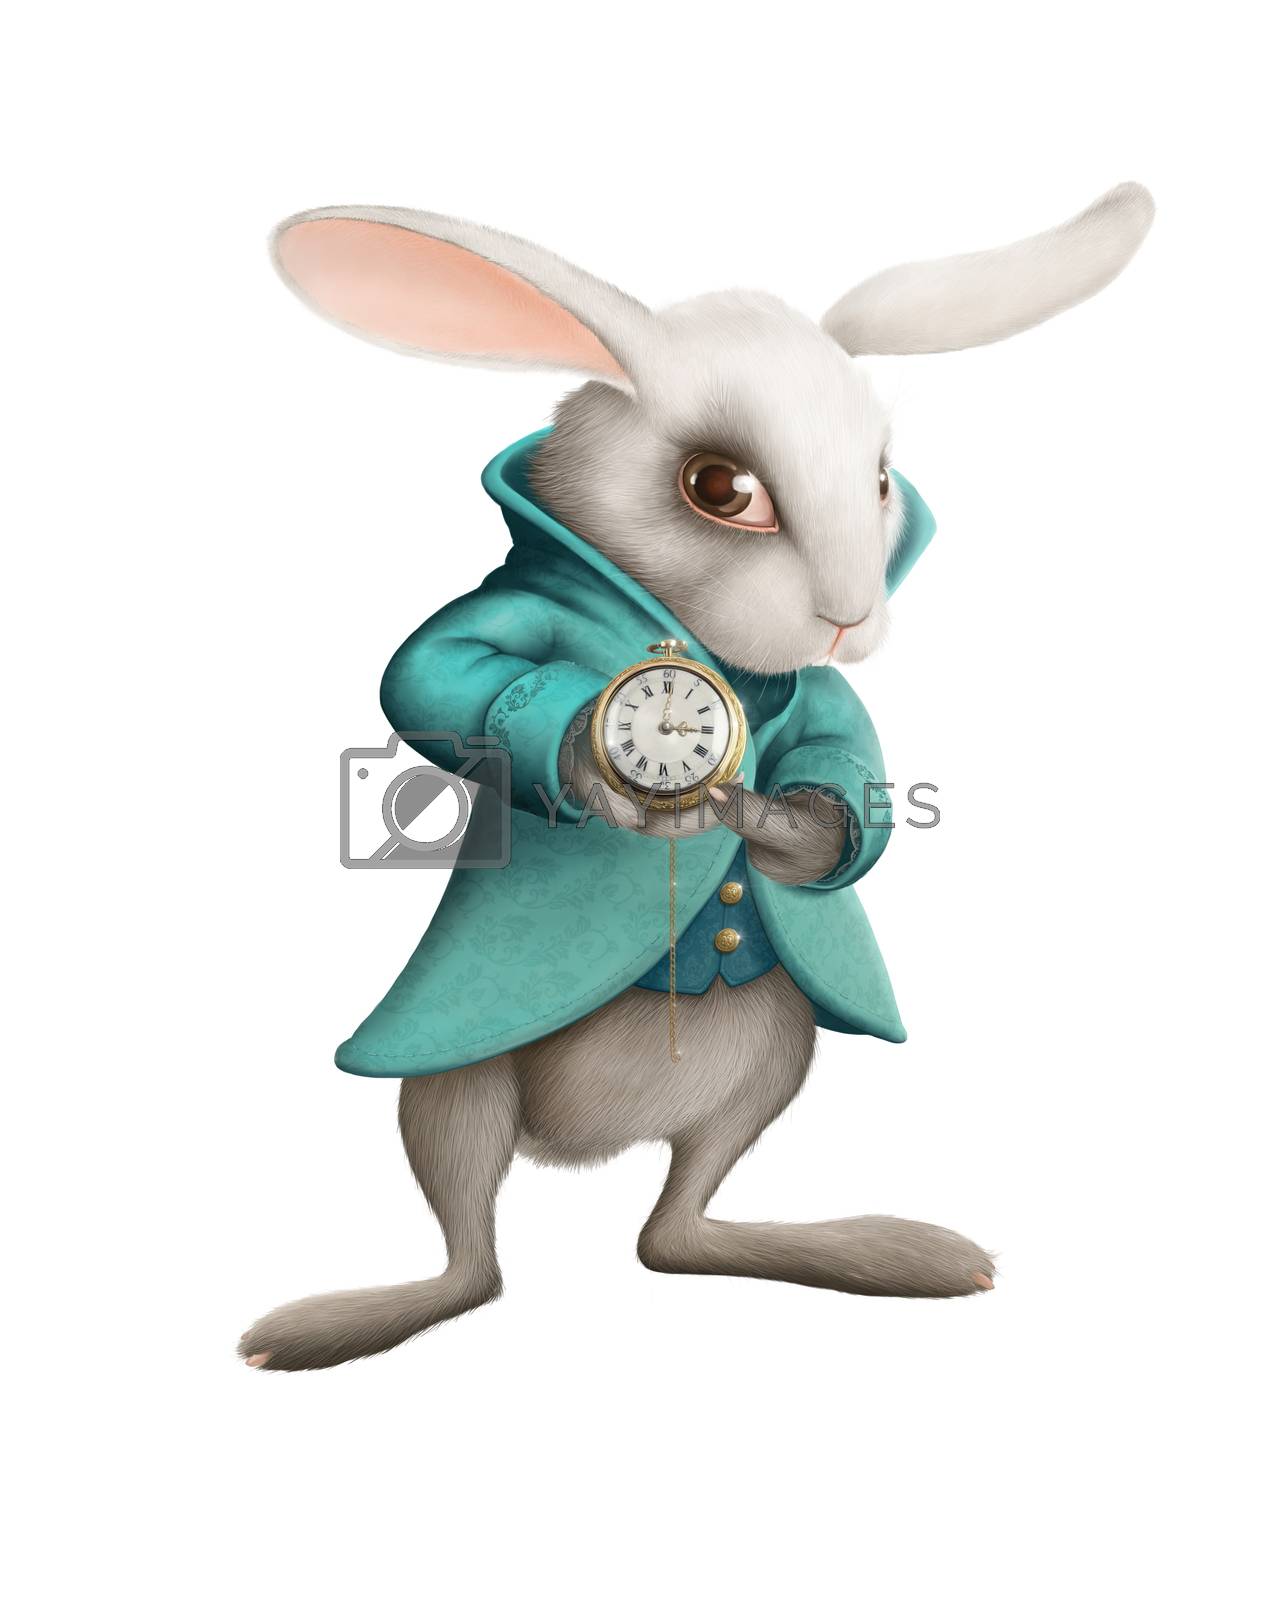 Royalty free image of white rabbit with clock by jordygraph